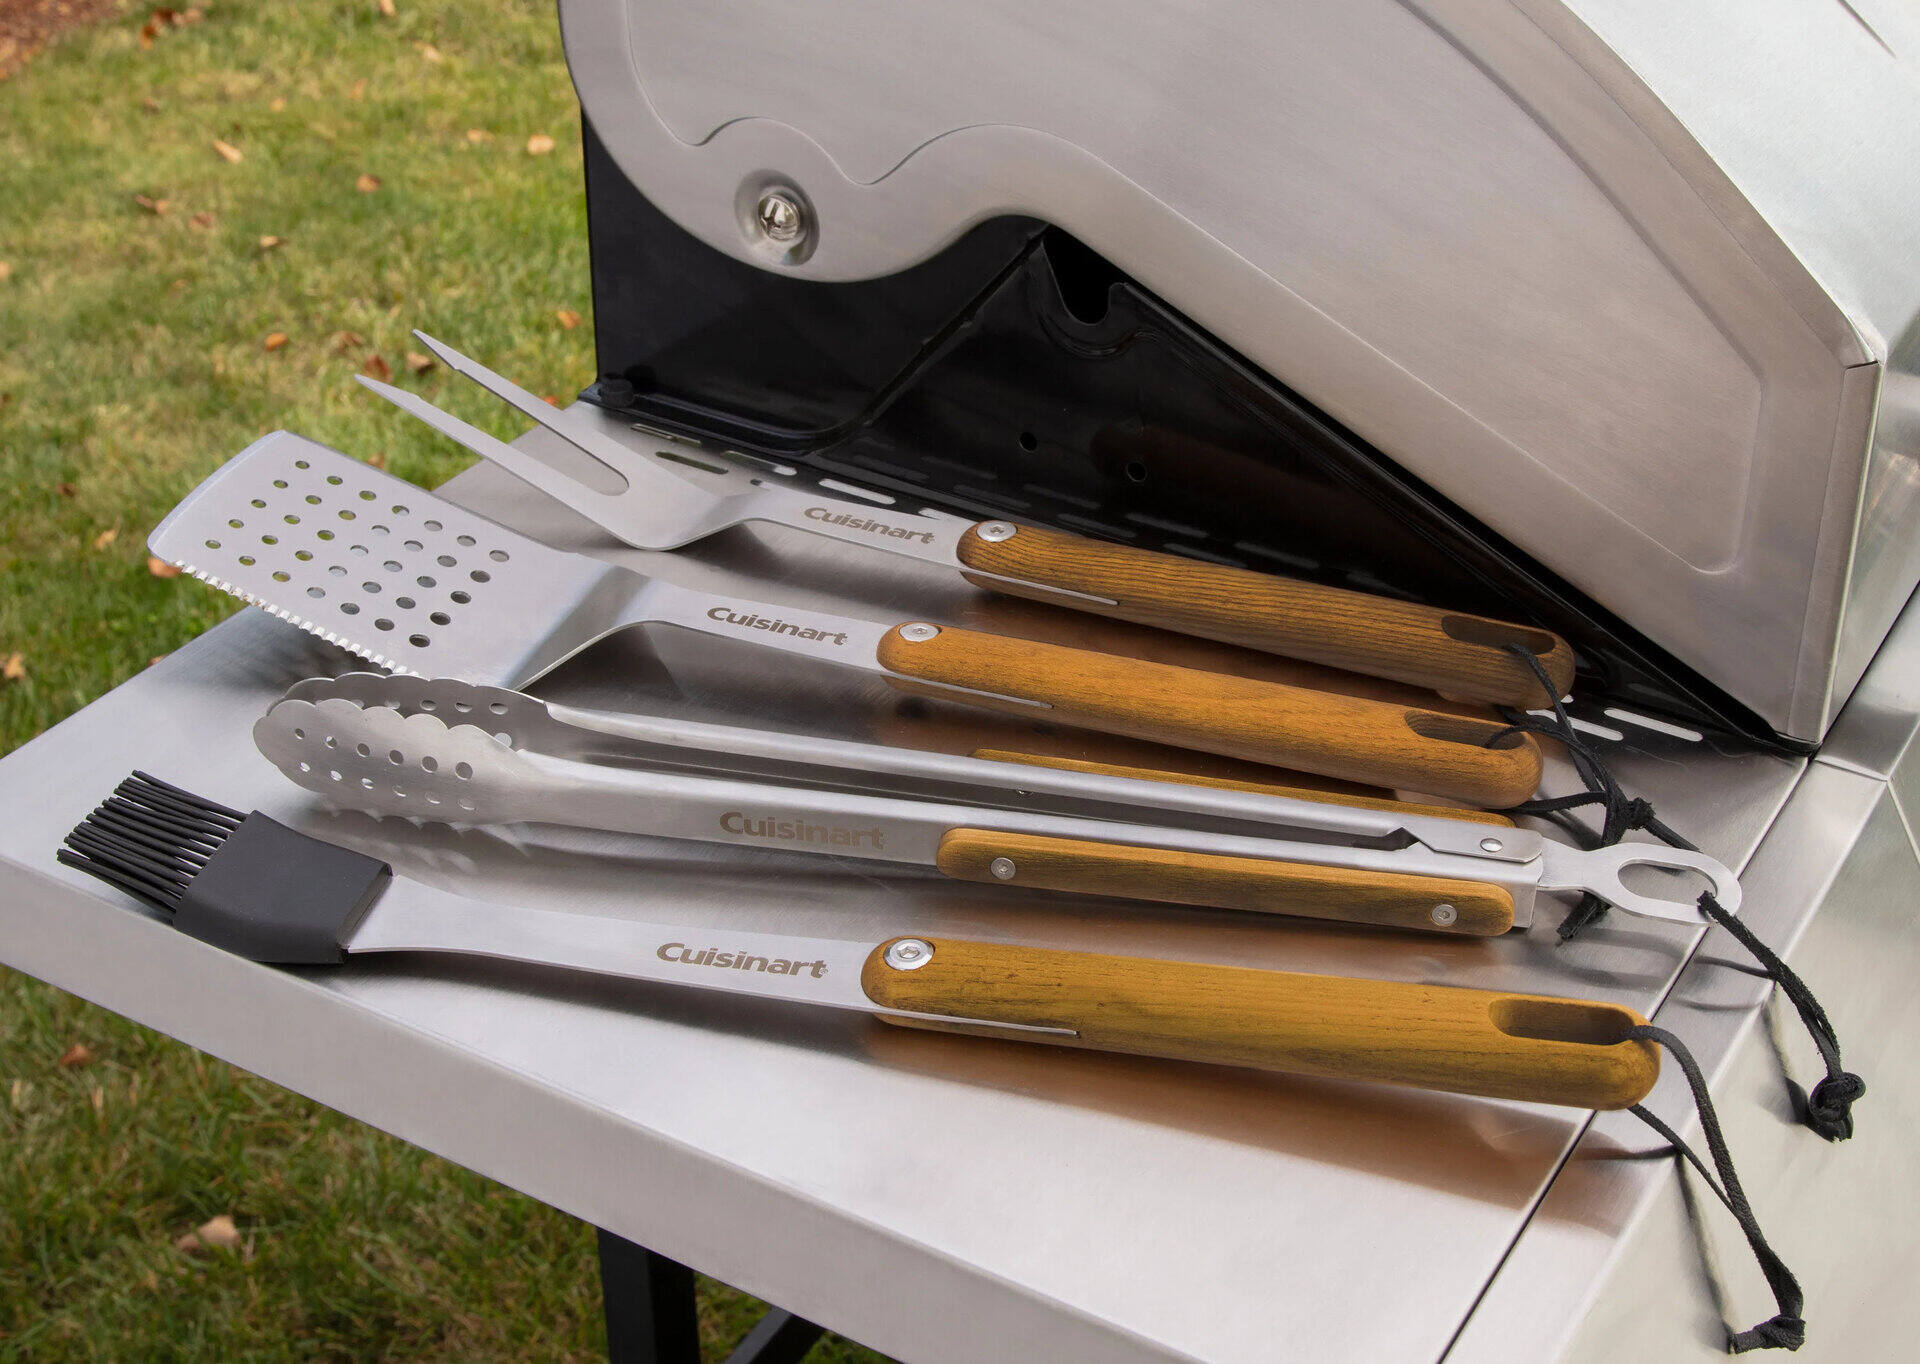 How To Store Grilling Tools